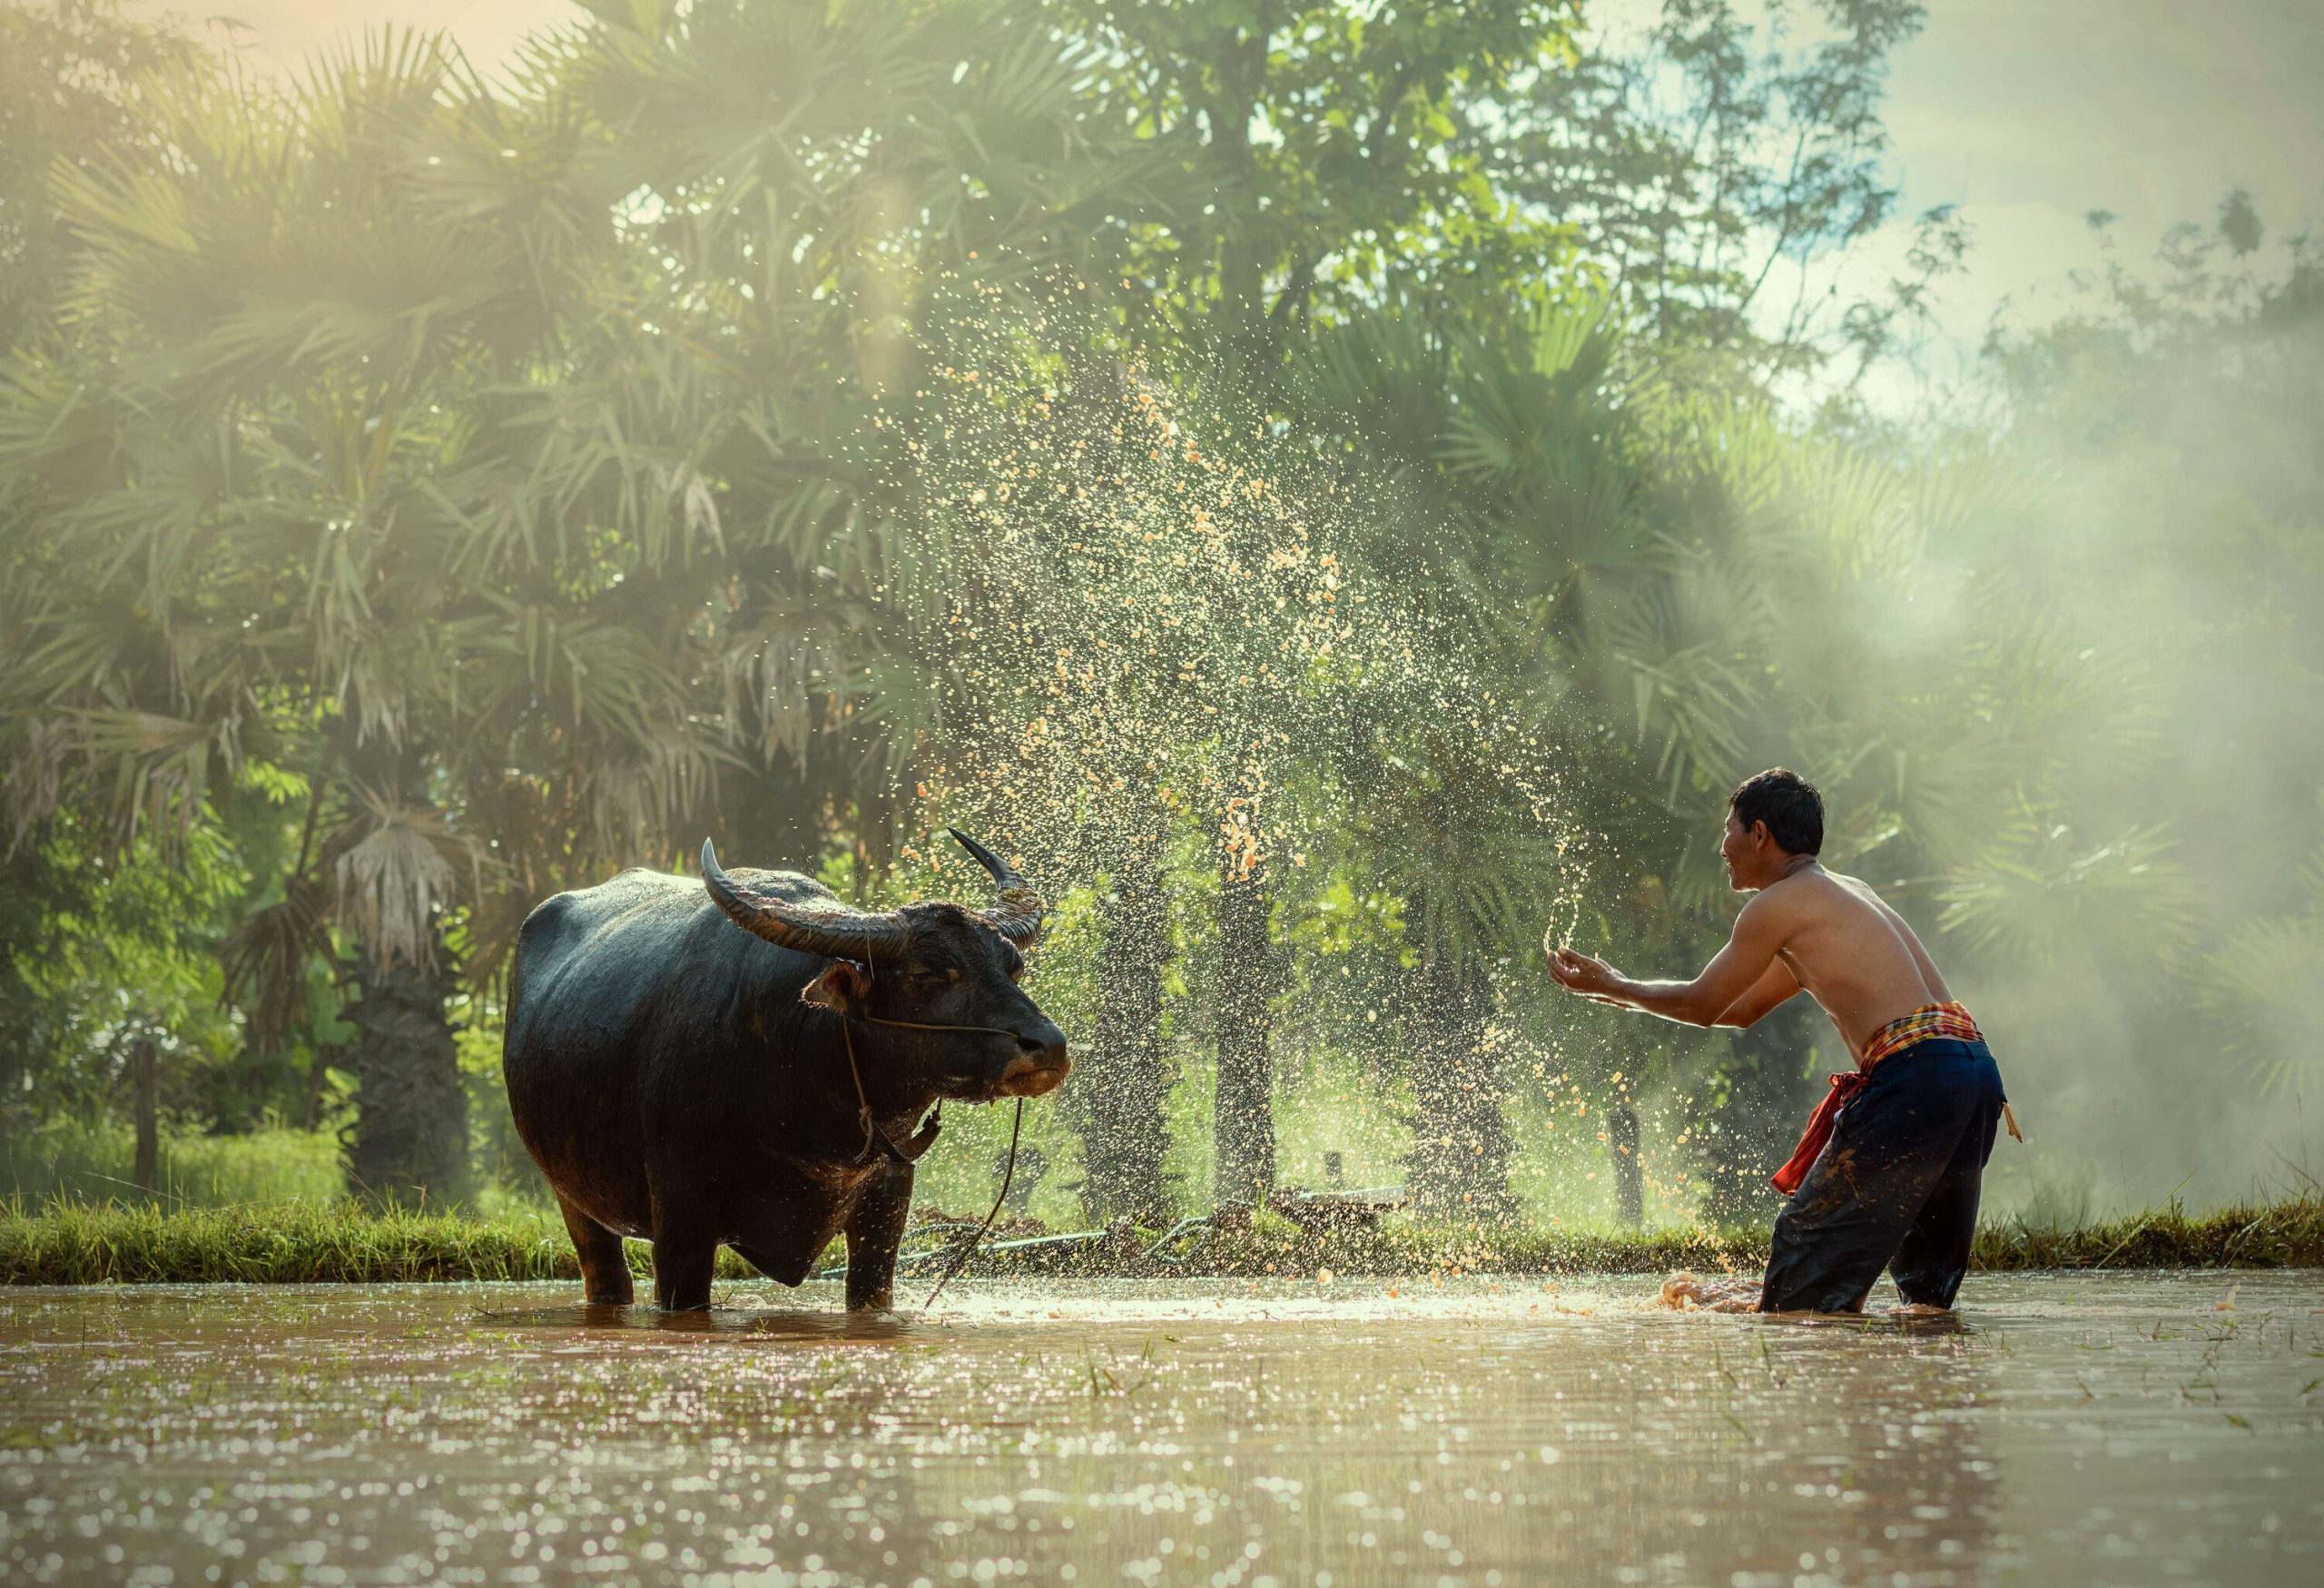 A farmer splashes water to a water buffalo in a shallow river.